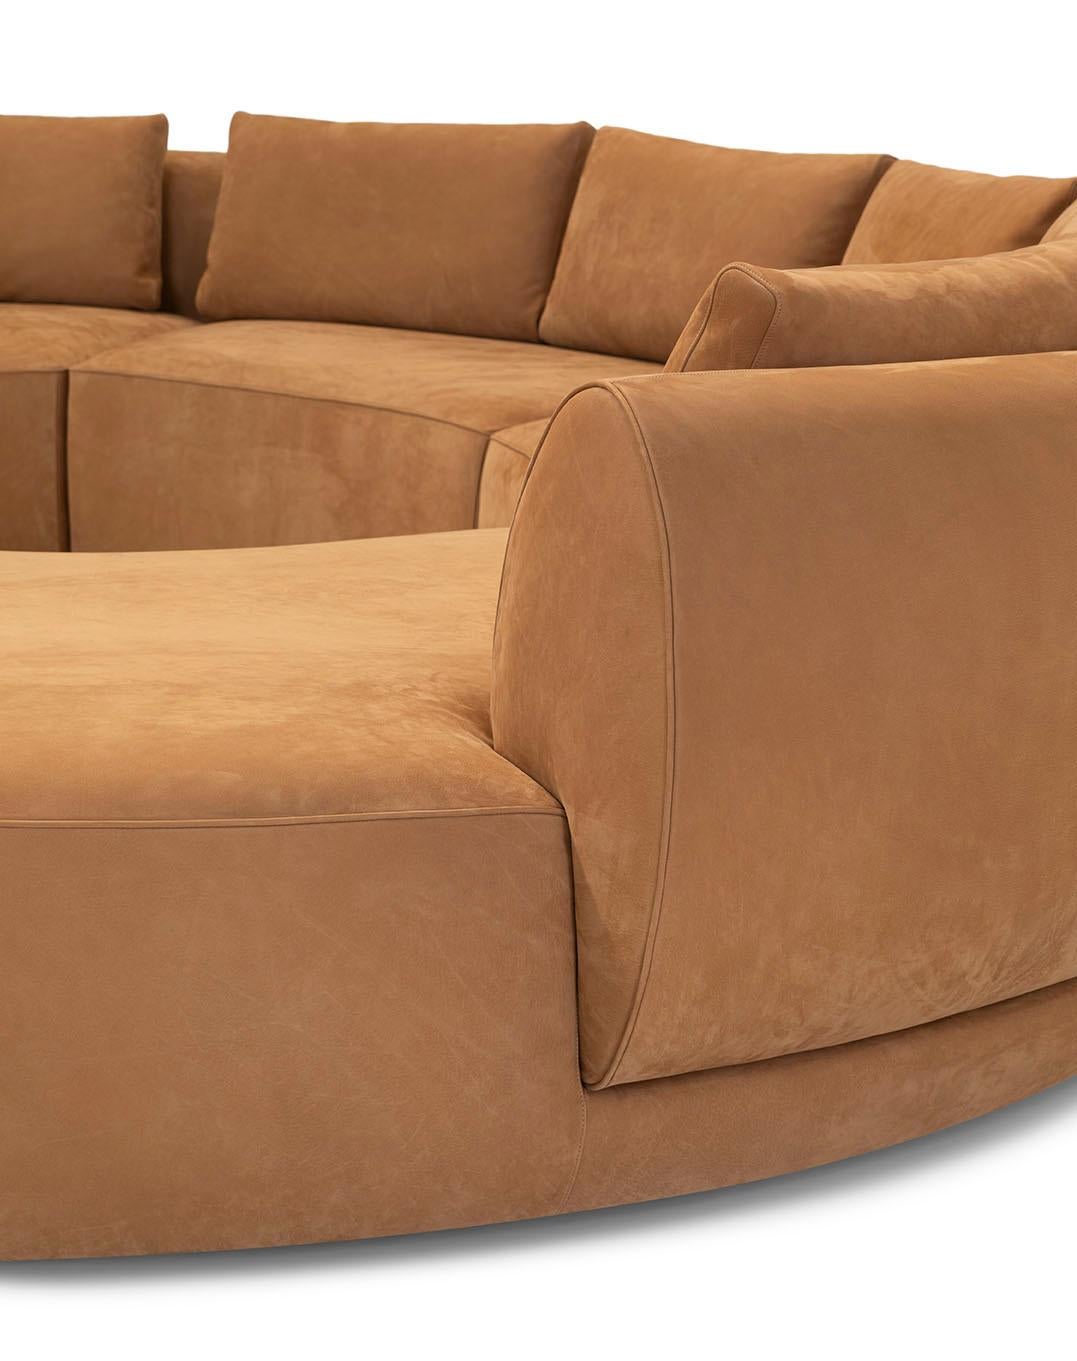 Contemporary Modern Modular Sofa Frame Made in Wood Leather Customisable For Sale